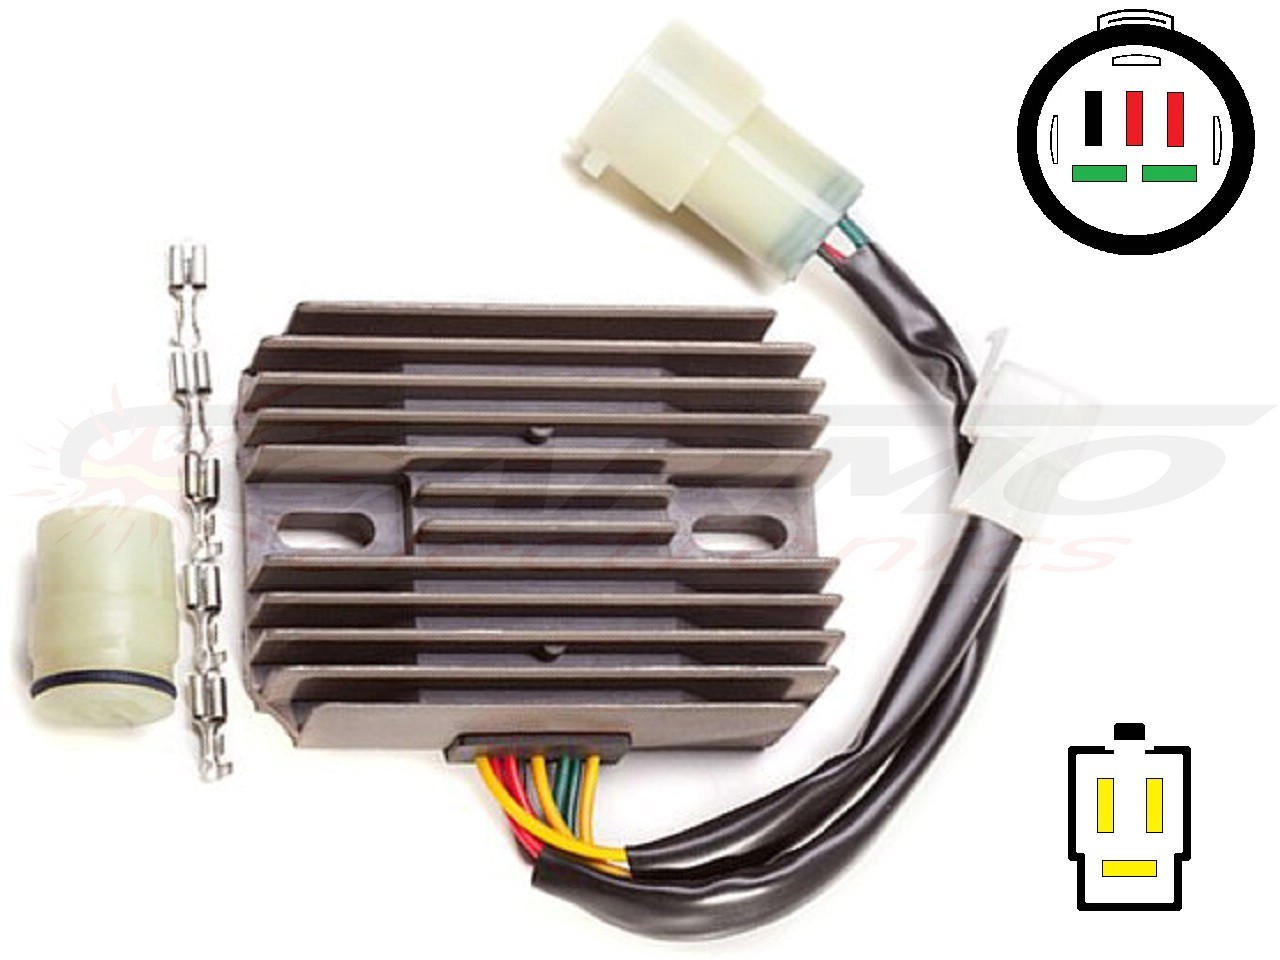 CARR824-LI Honda XRV750 Africa Twin RD04 MOSFET Voltage regulator rectifier - Lithium Ion - Click Image to Close